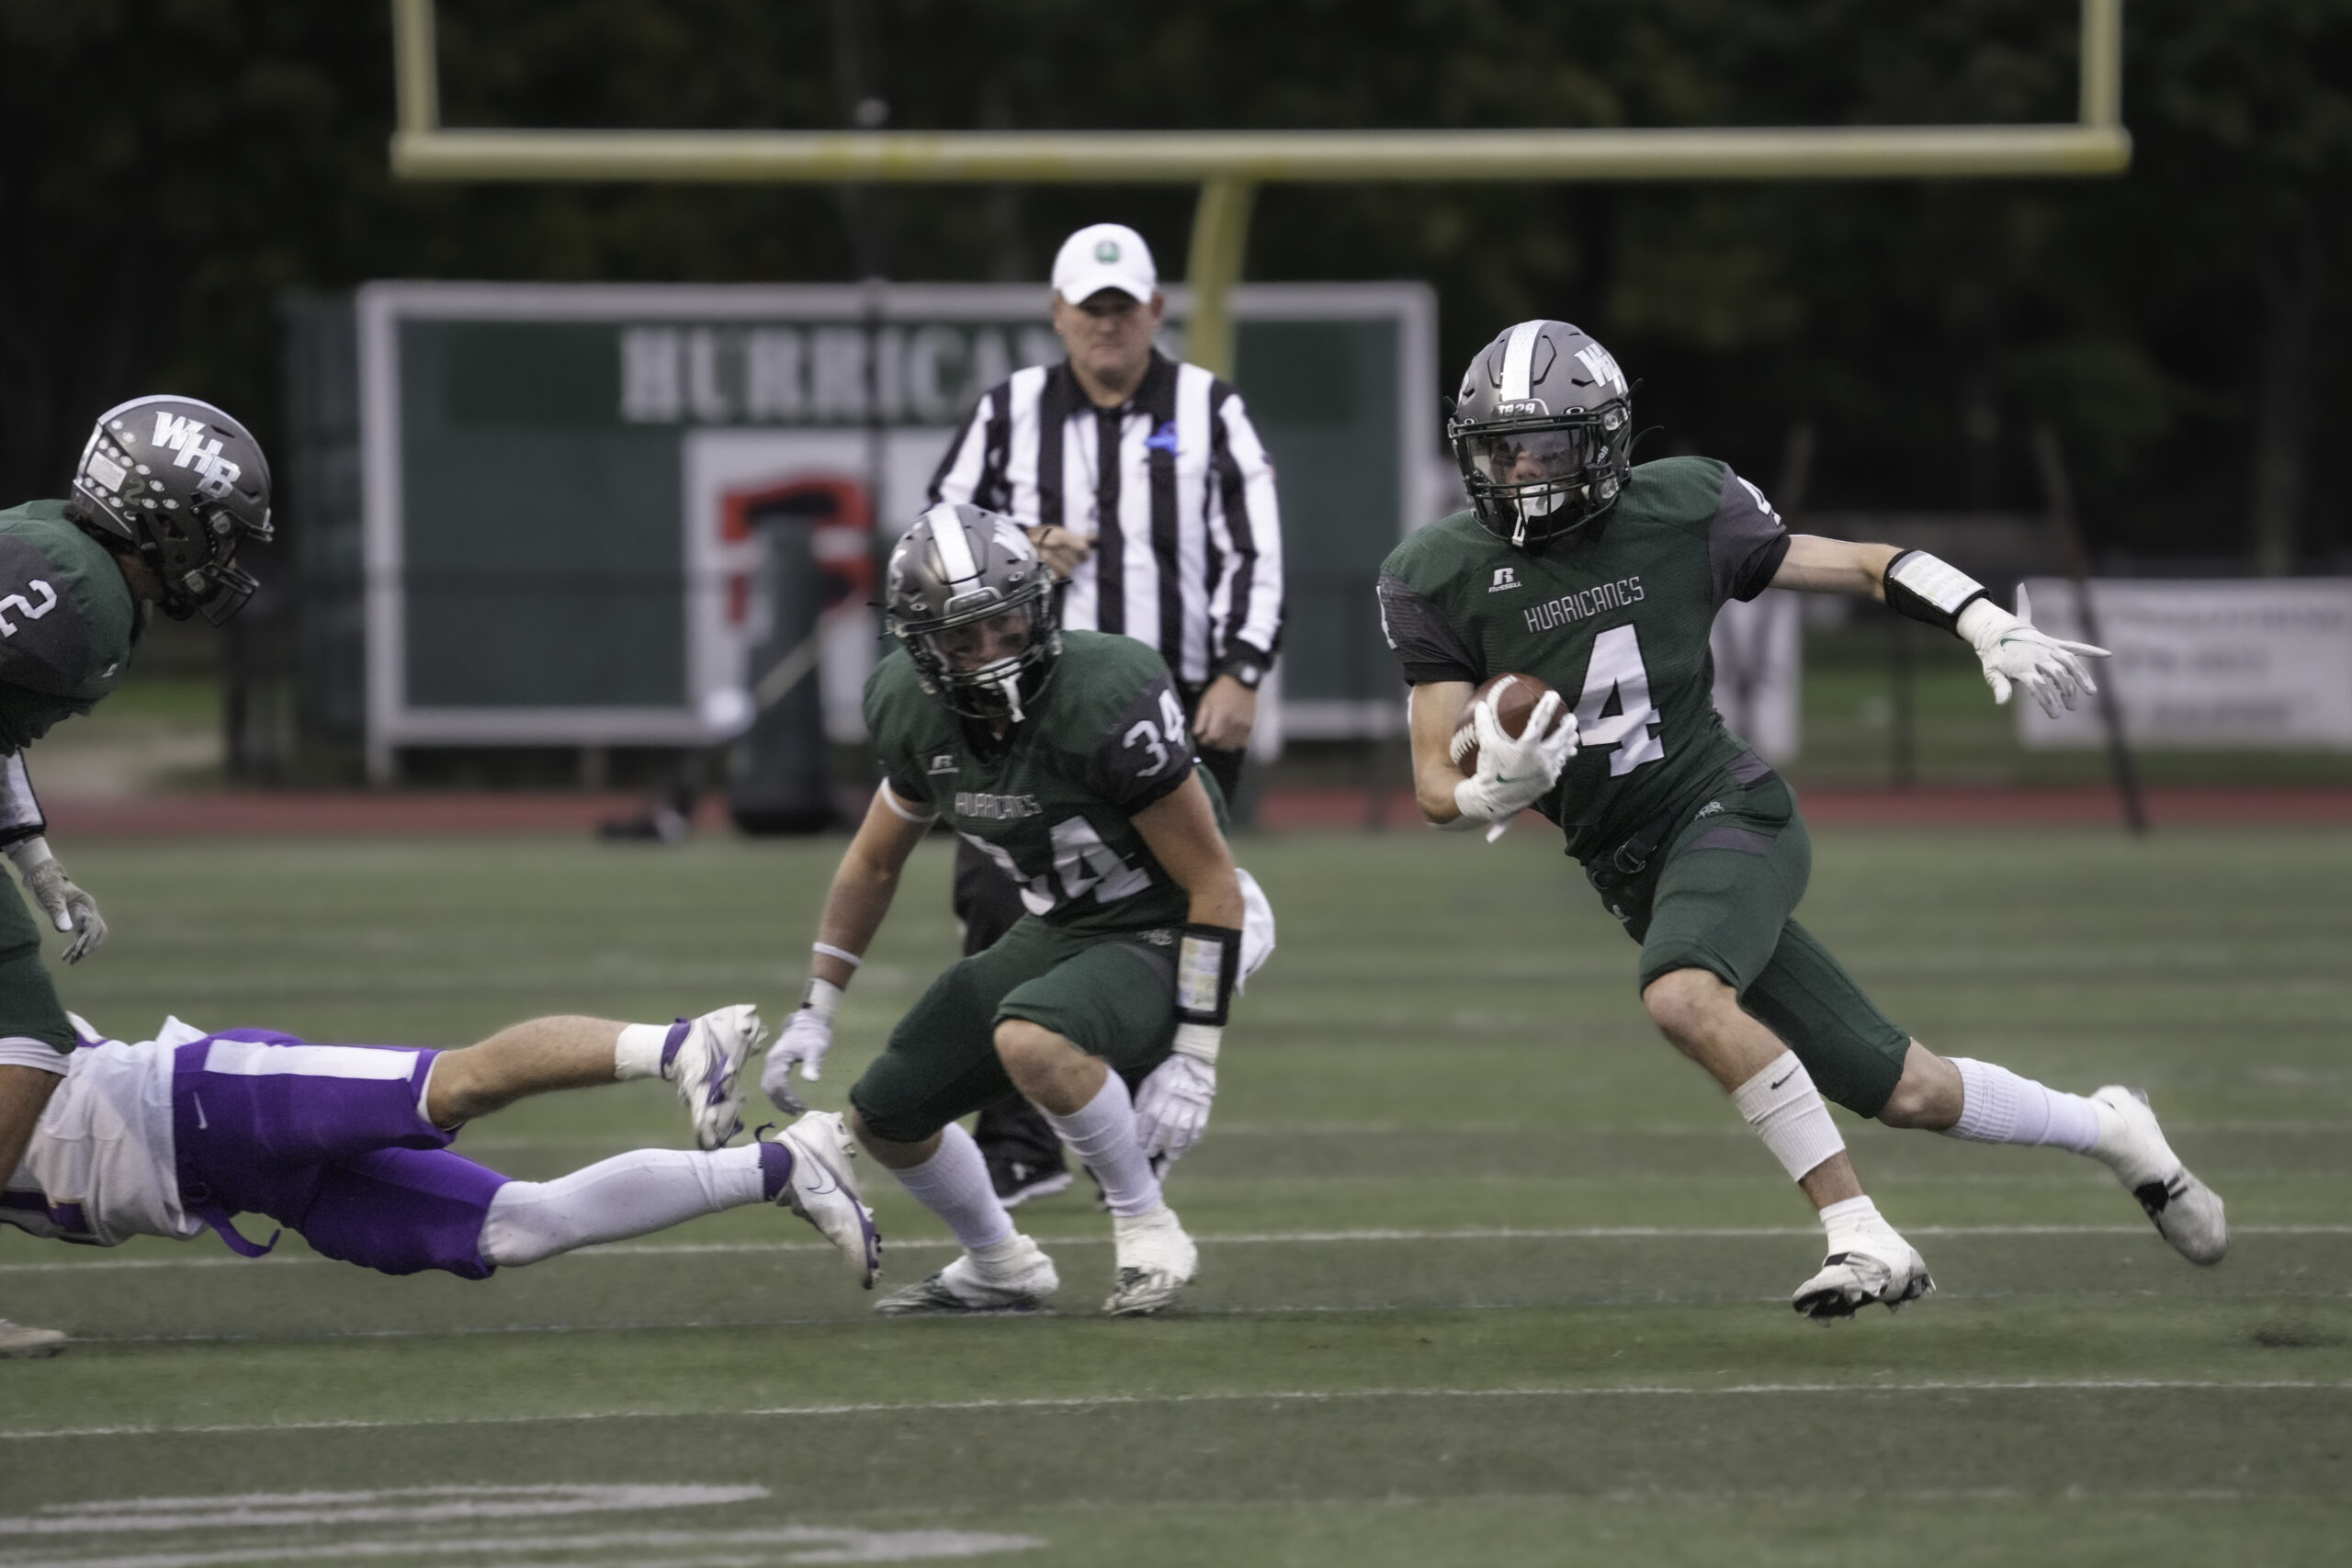 The Westhampton Beach Hurricanes were up 20-0 after the first quarter and 34-0 at halftime en route to a win over Islip at home on Friday night, which kept the Hurricanes undefeated on the season. RON ESPOSITO